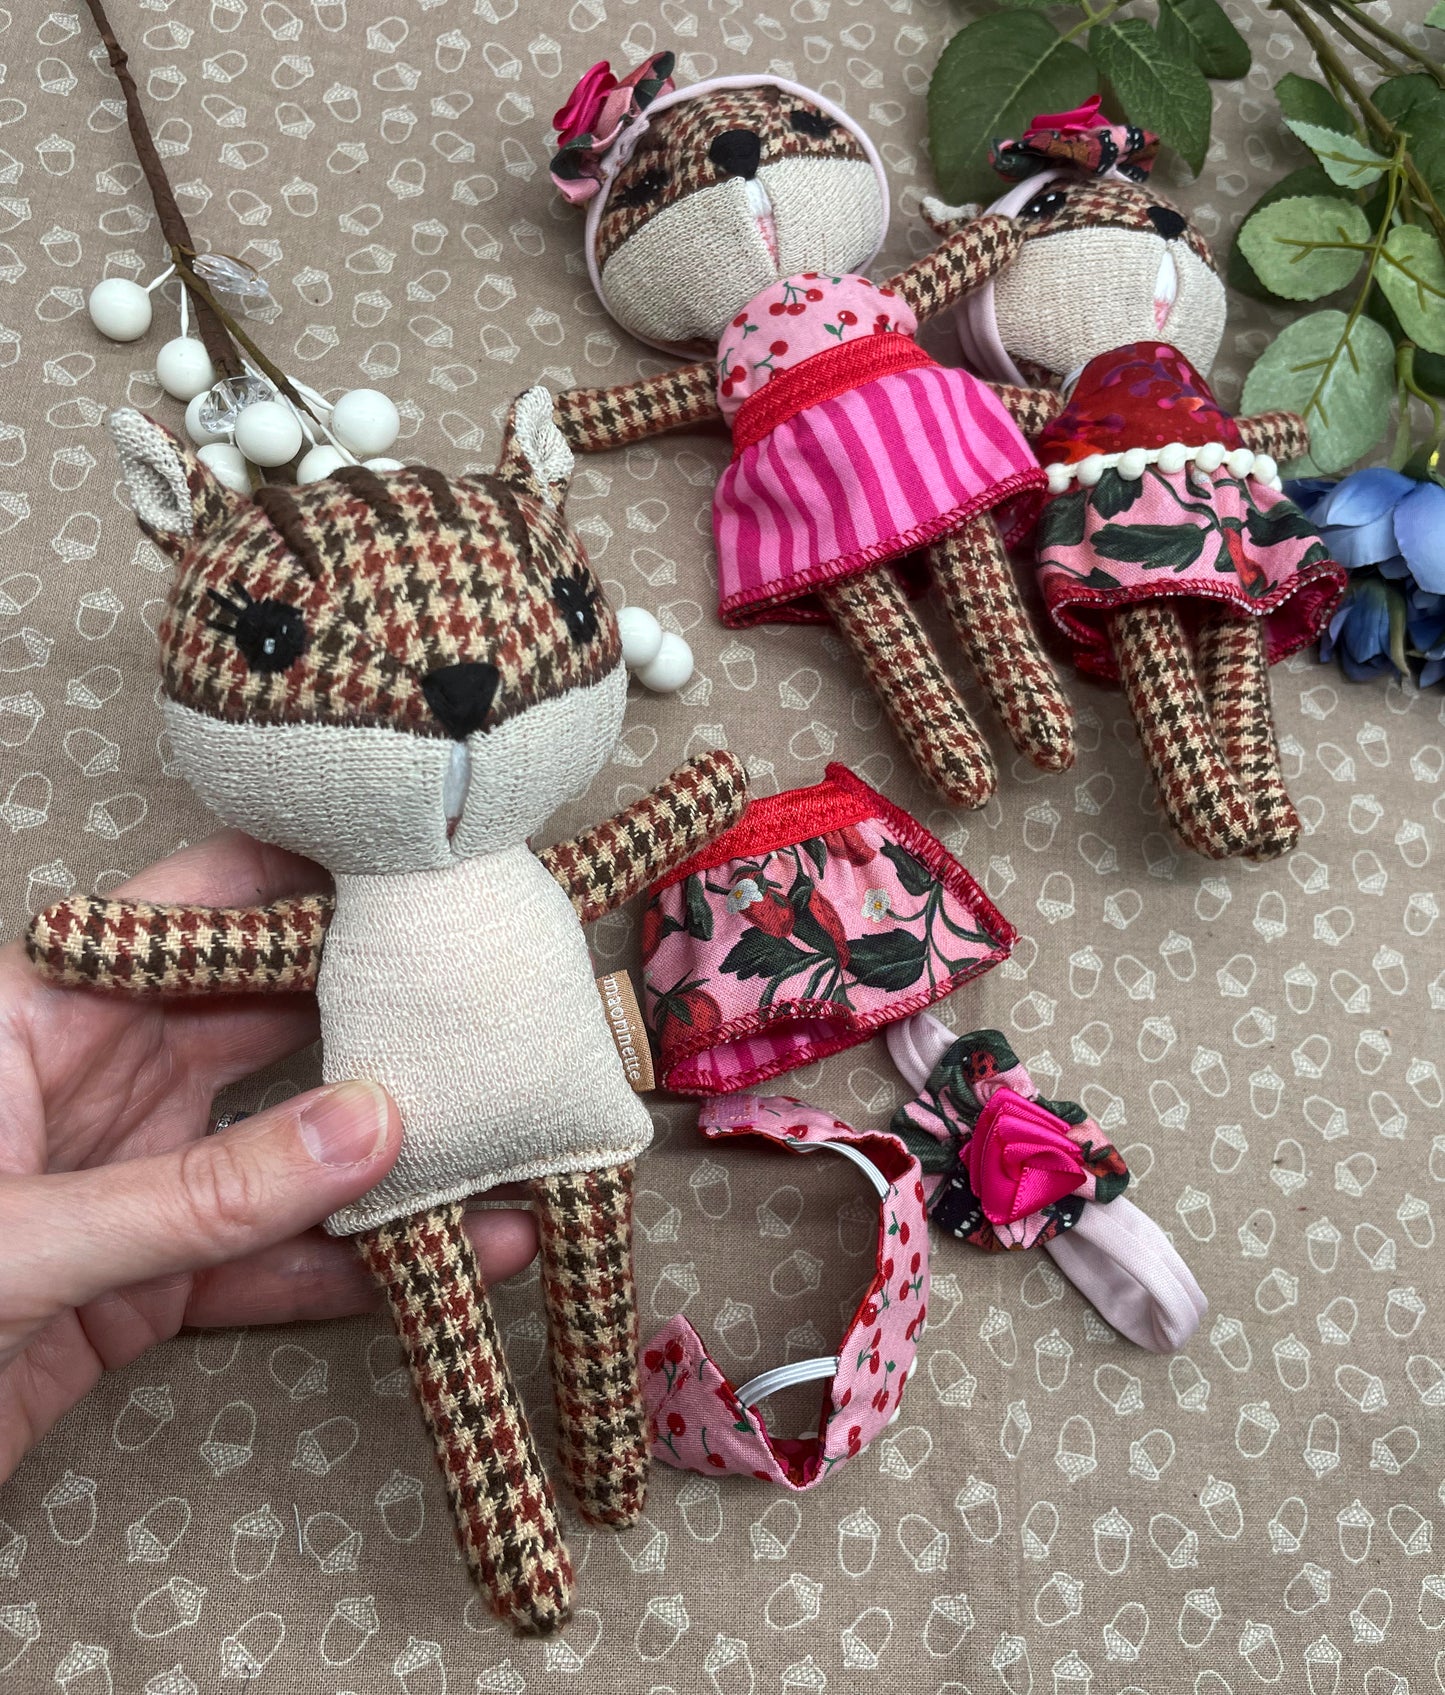 Handmade Chipmunk Doll, Stuffed chipmunk, Reversible clothes, gift idea, gift for kids, Pink, Strawberry, Cherry, plaid, cute doll